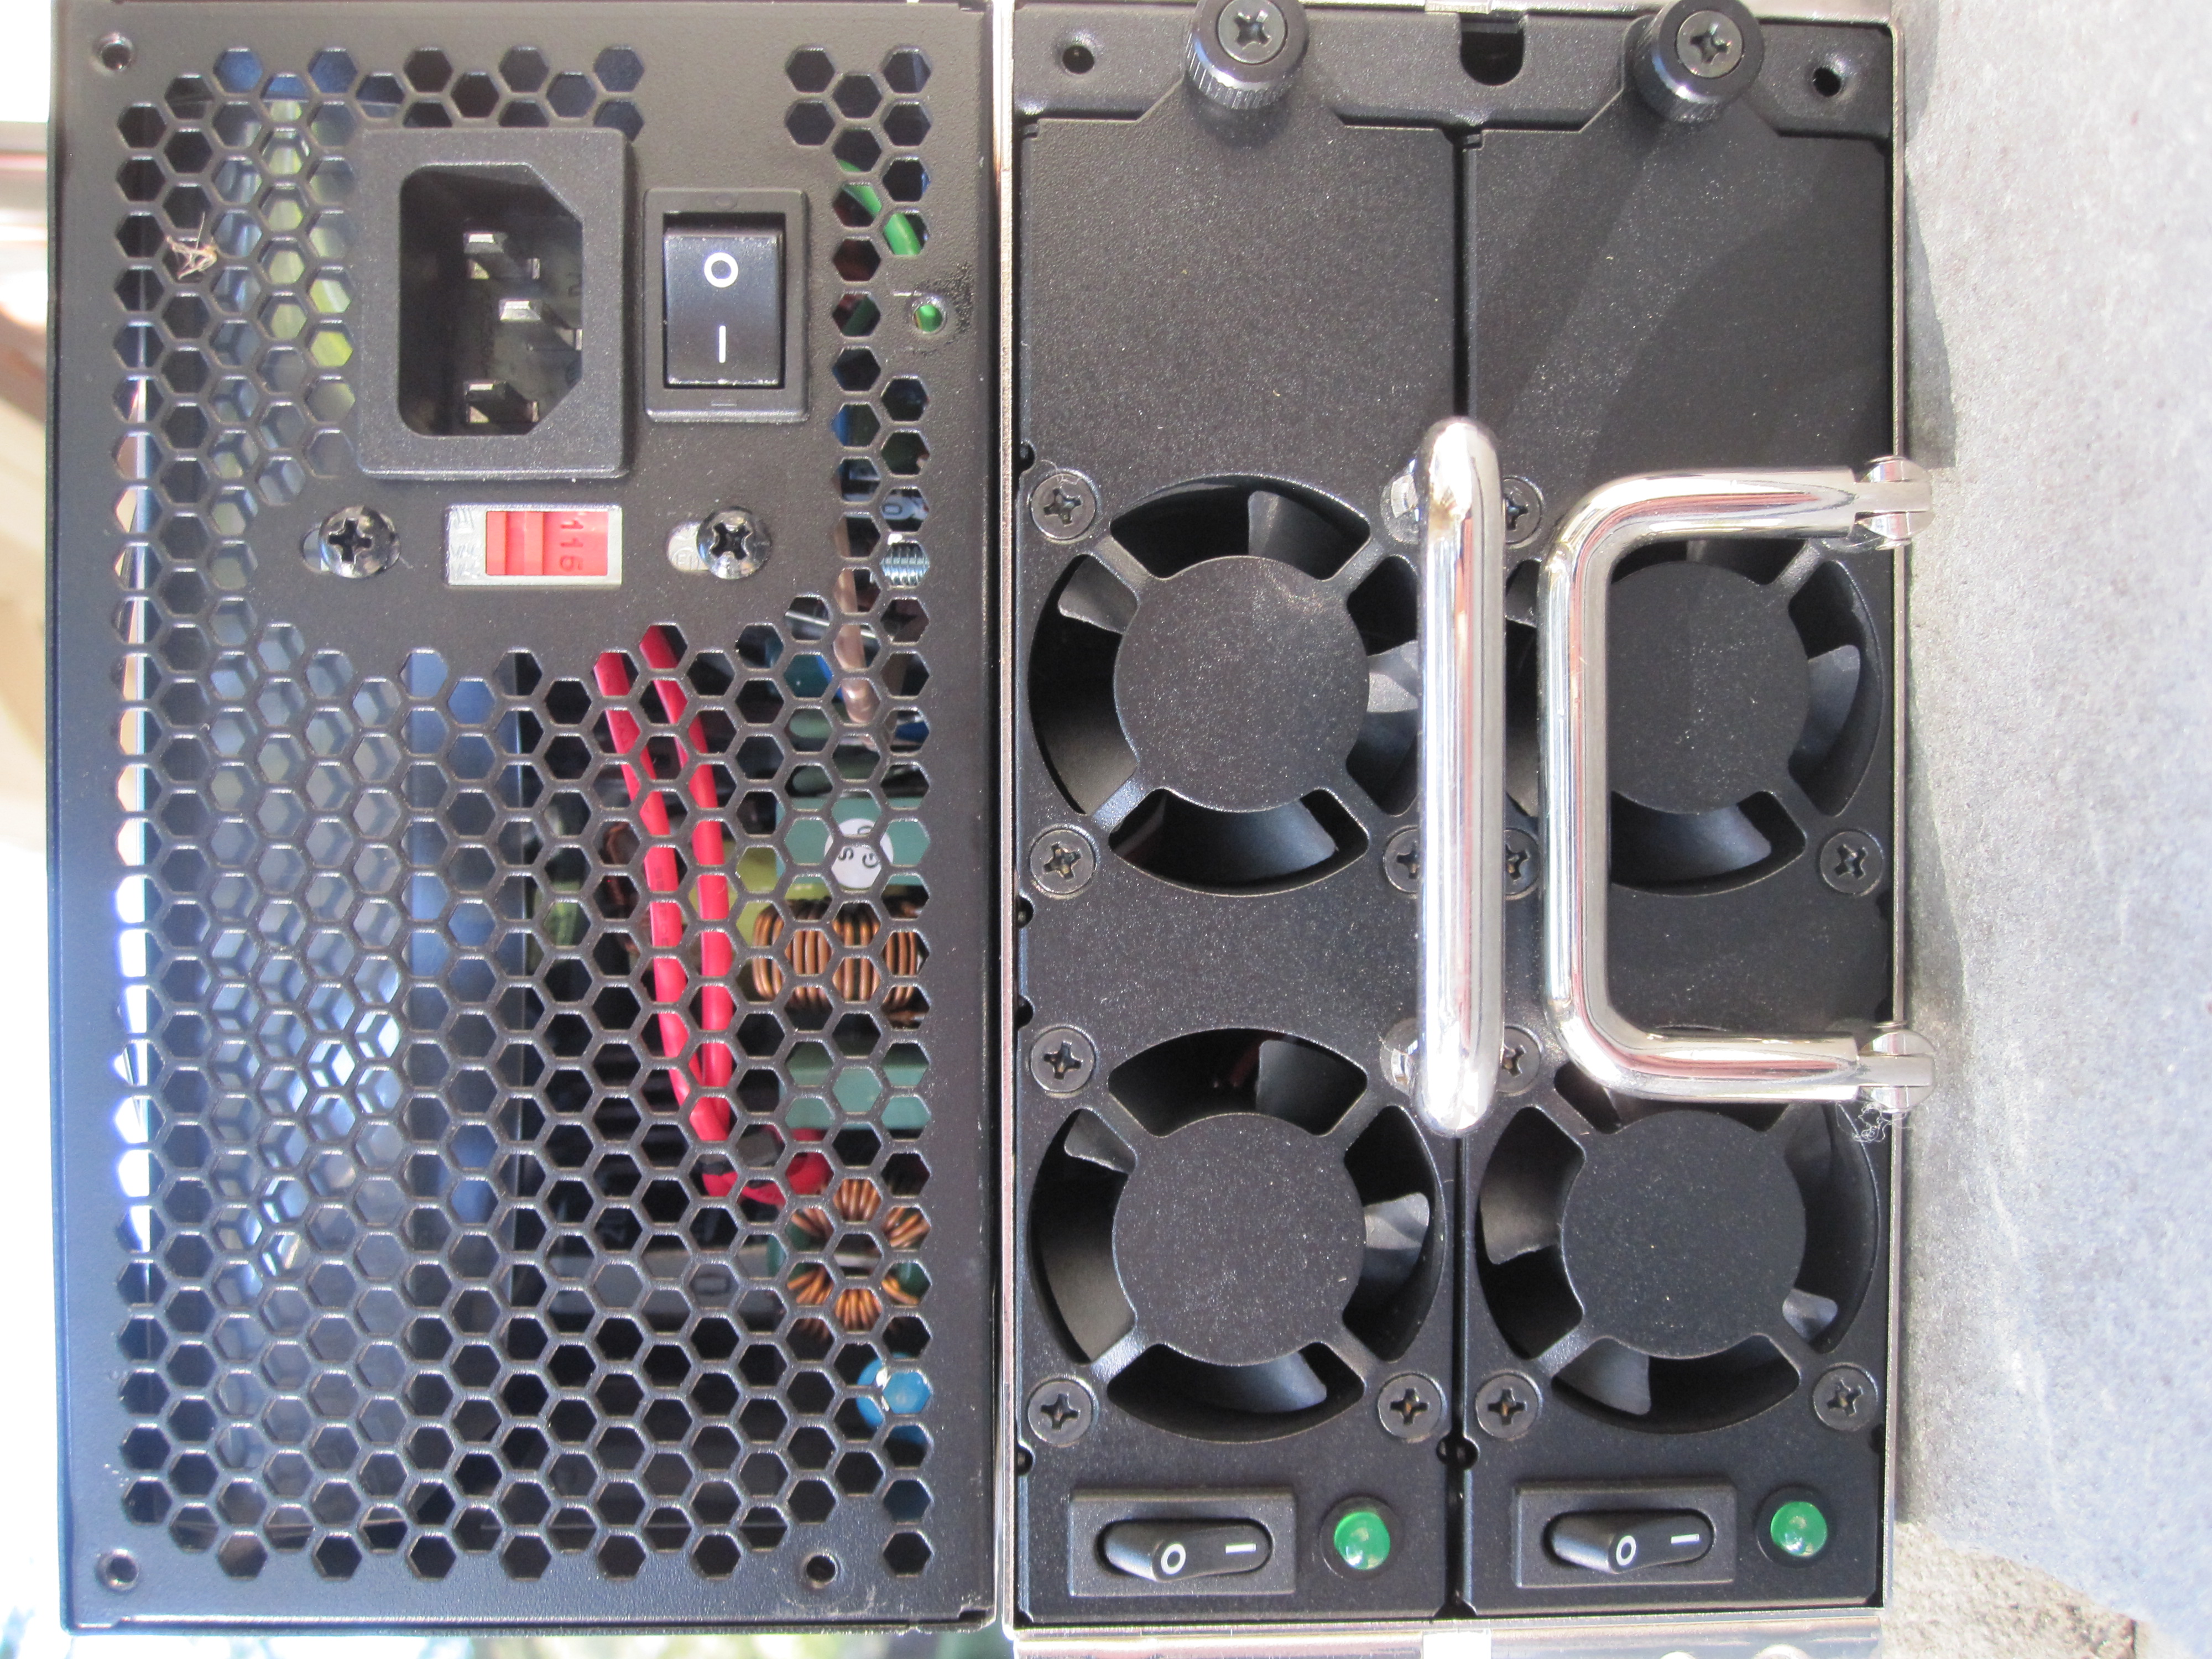 Redundant Power Supply: Why is it Important? - RackSolutions